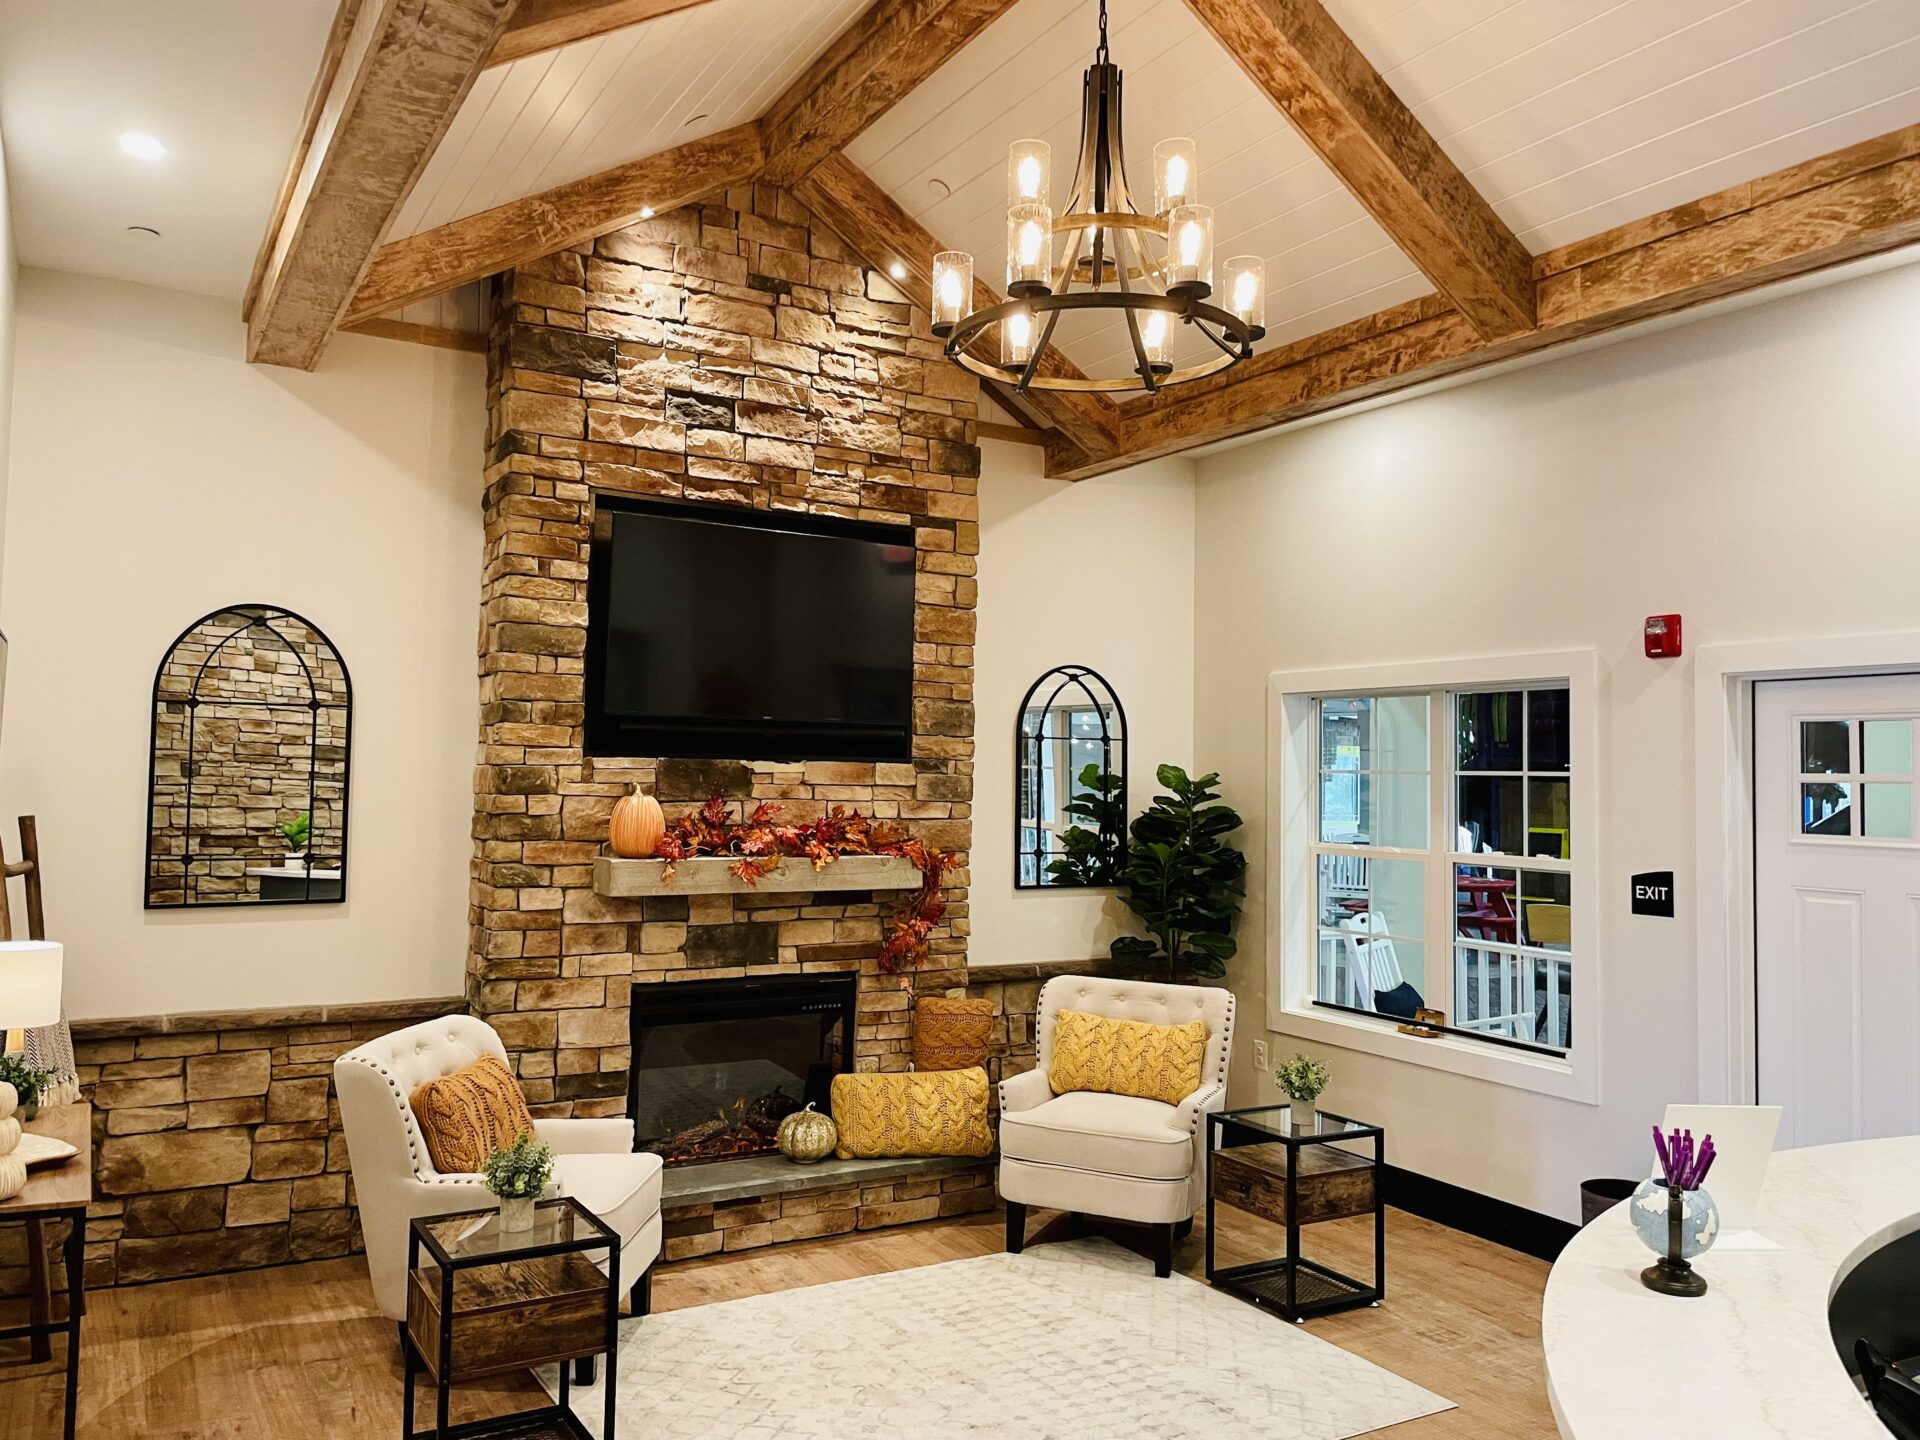 Image of dental office lobby with brick fireplace, sitting chairs, and white carpet. 